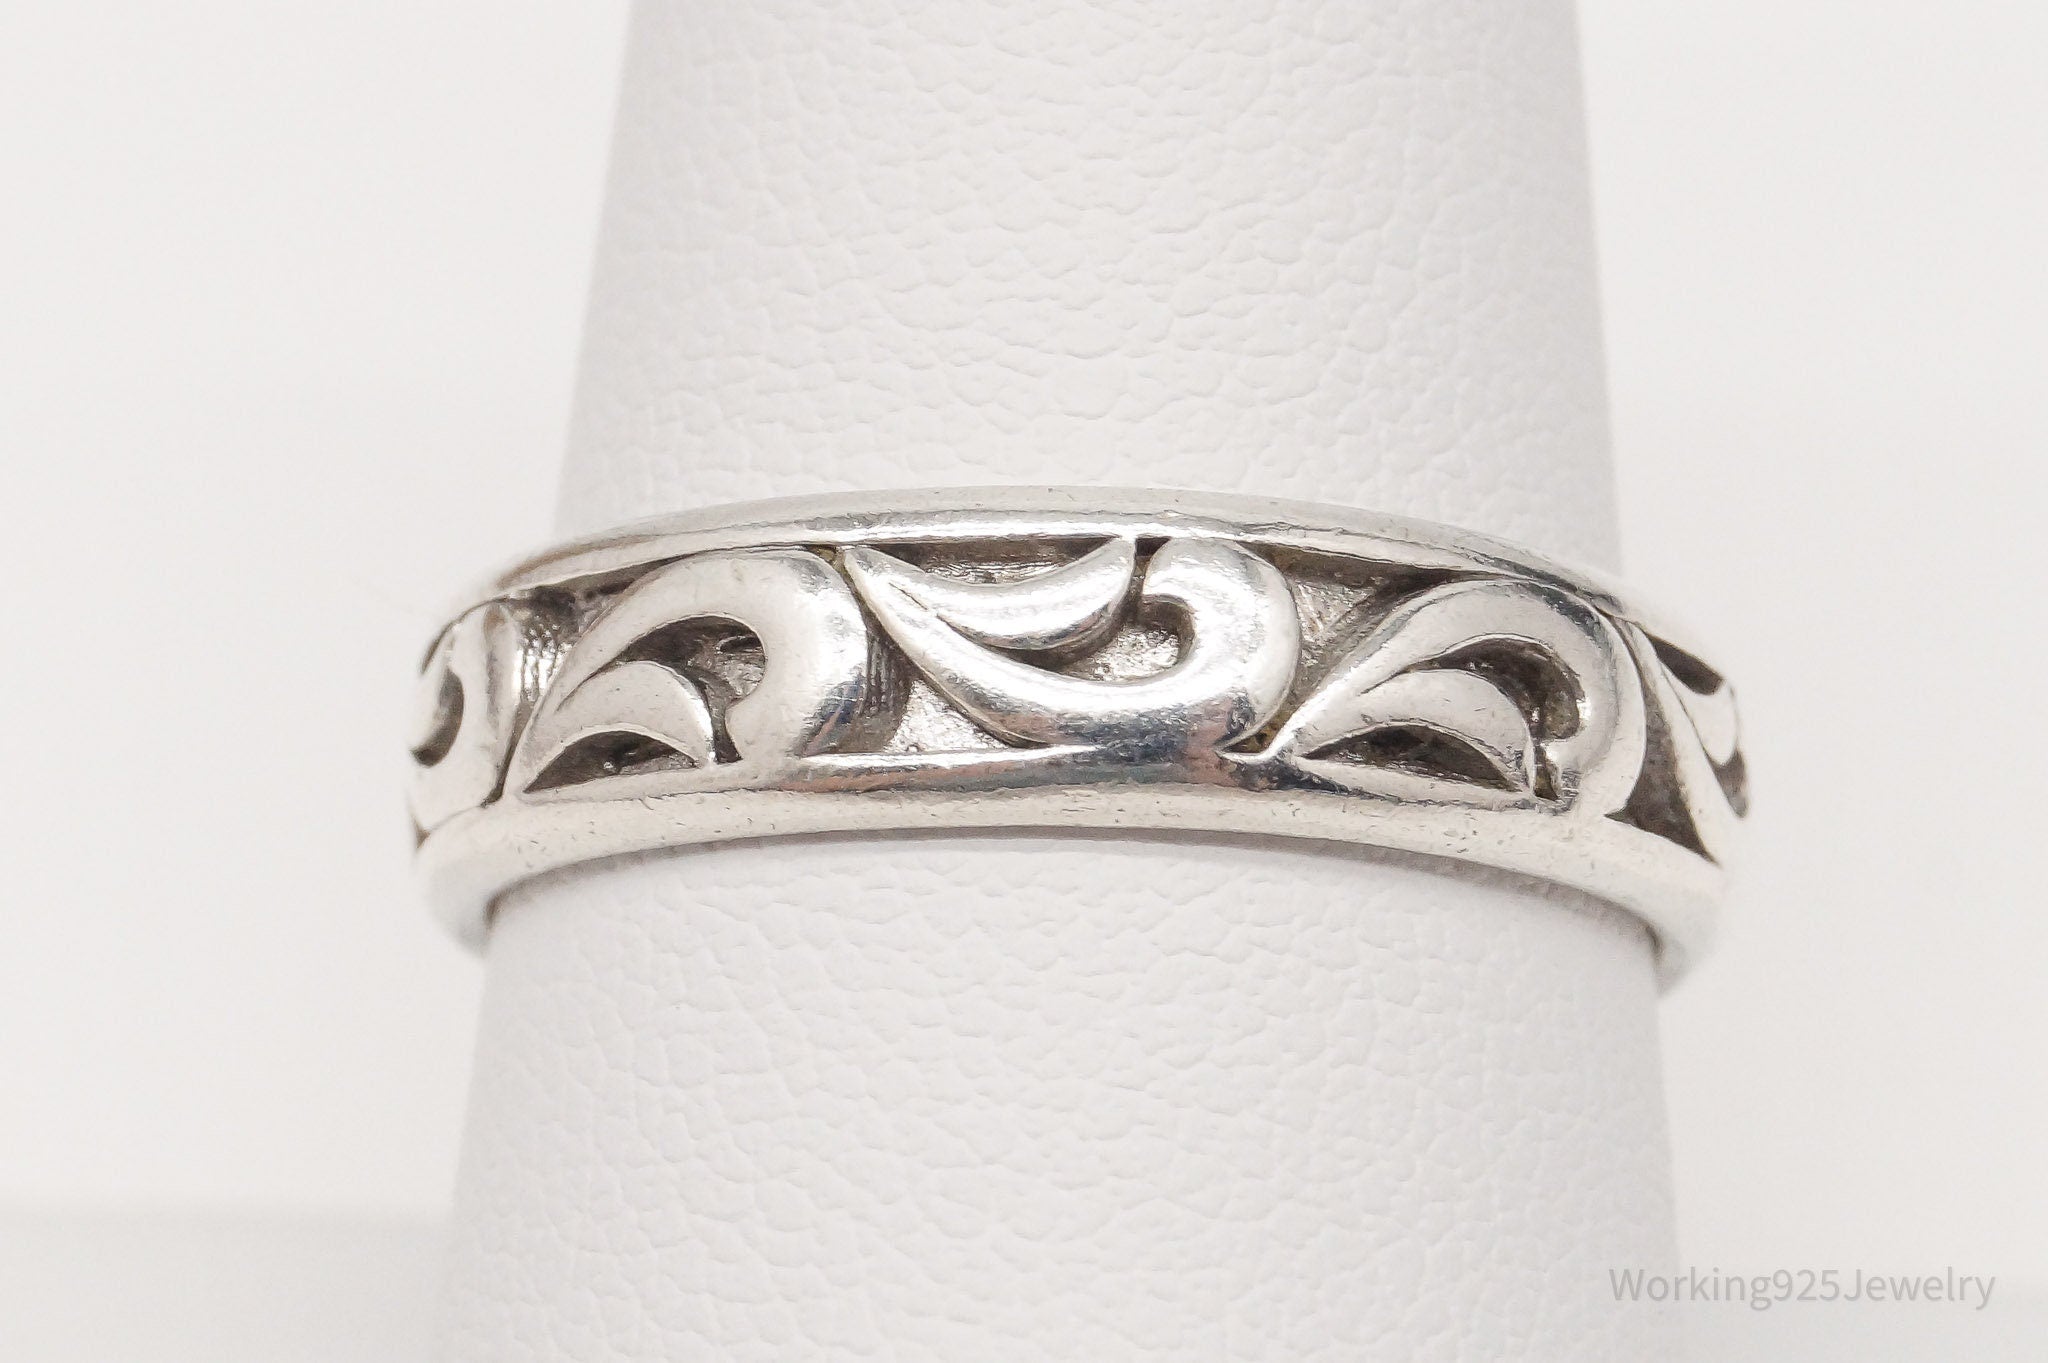 Vintage Art Deco Sterling Silver Band Ring - Size 8.75